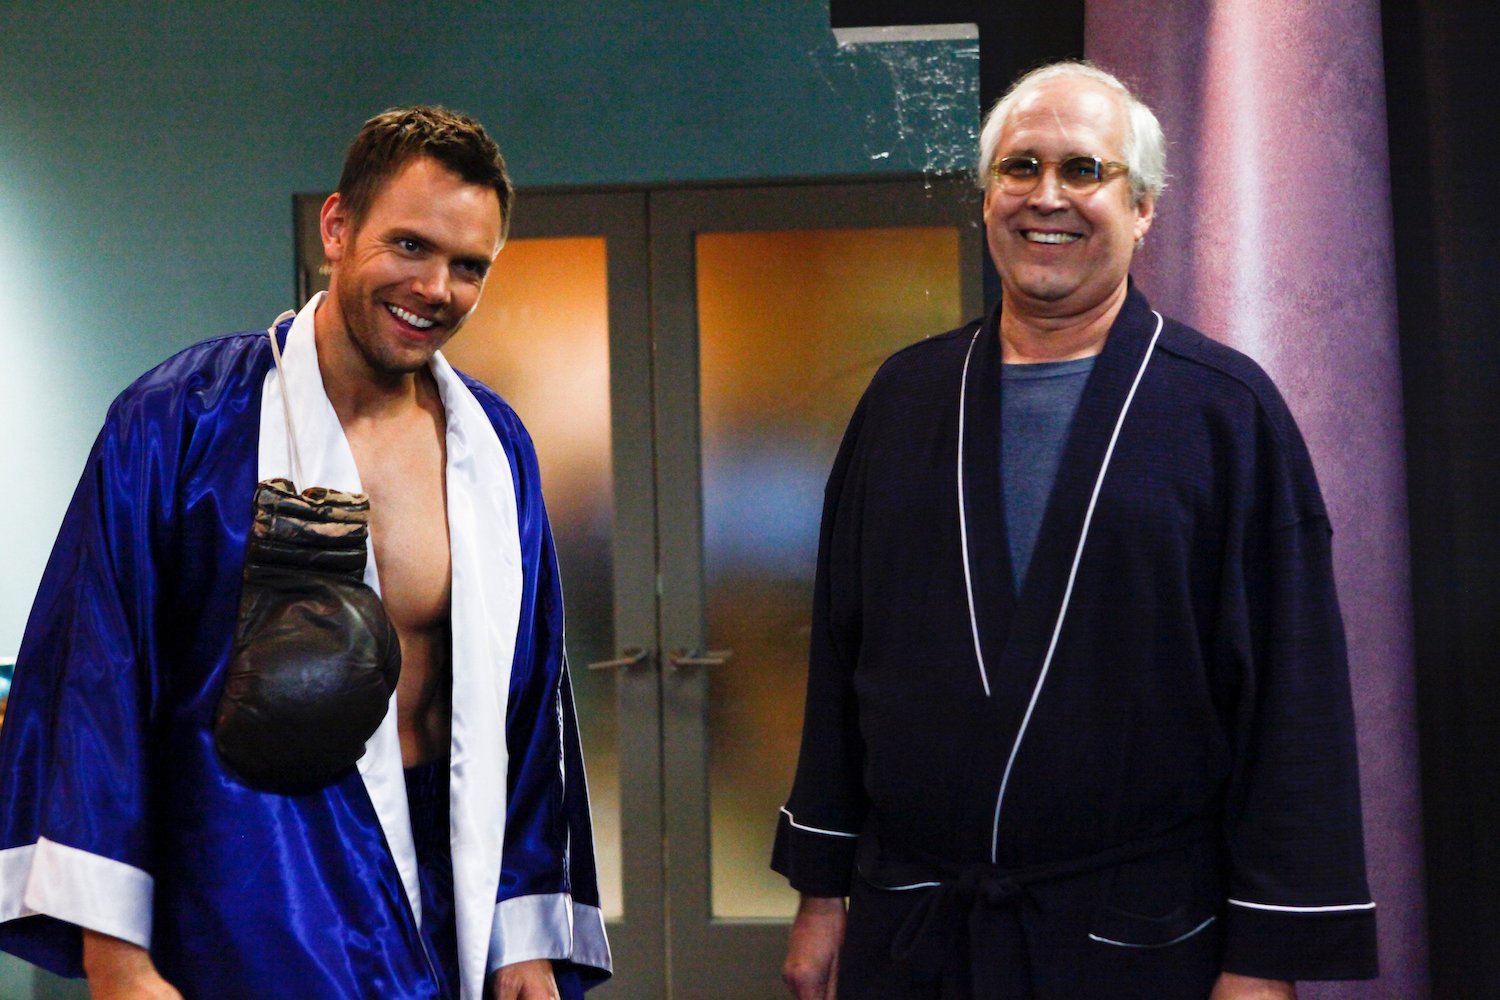 (L-R) Joel McHale and Chevy Chase laughing, wearing boxing robes